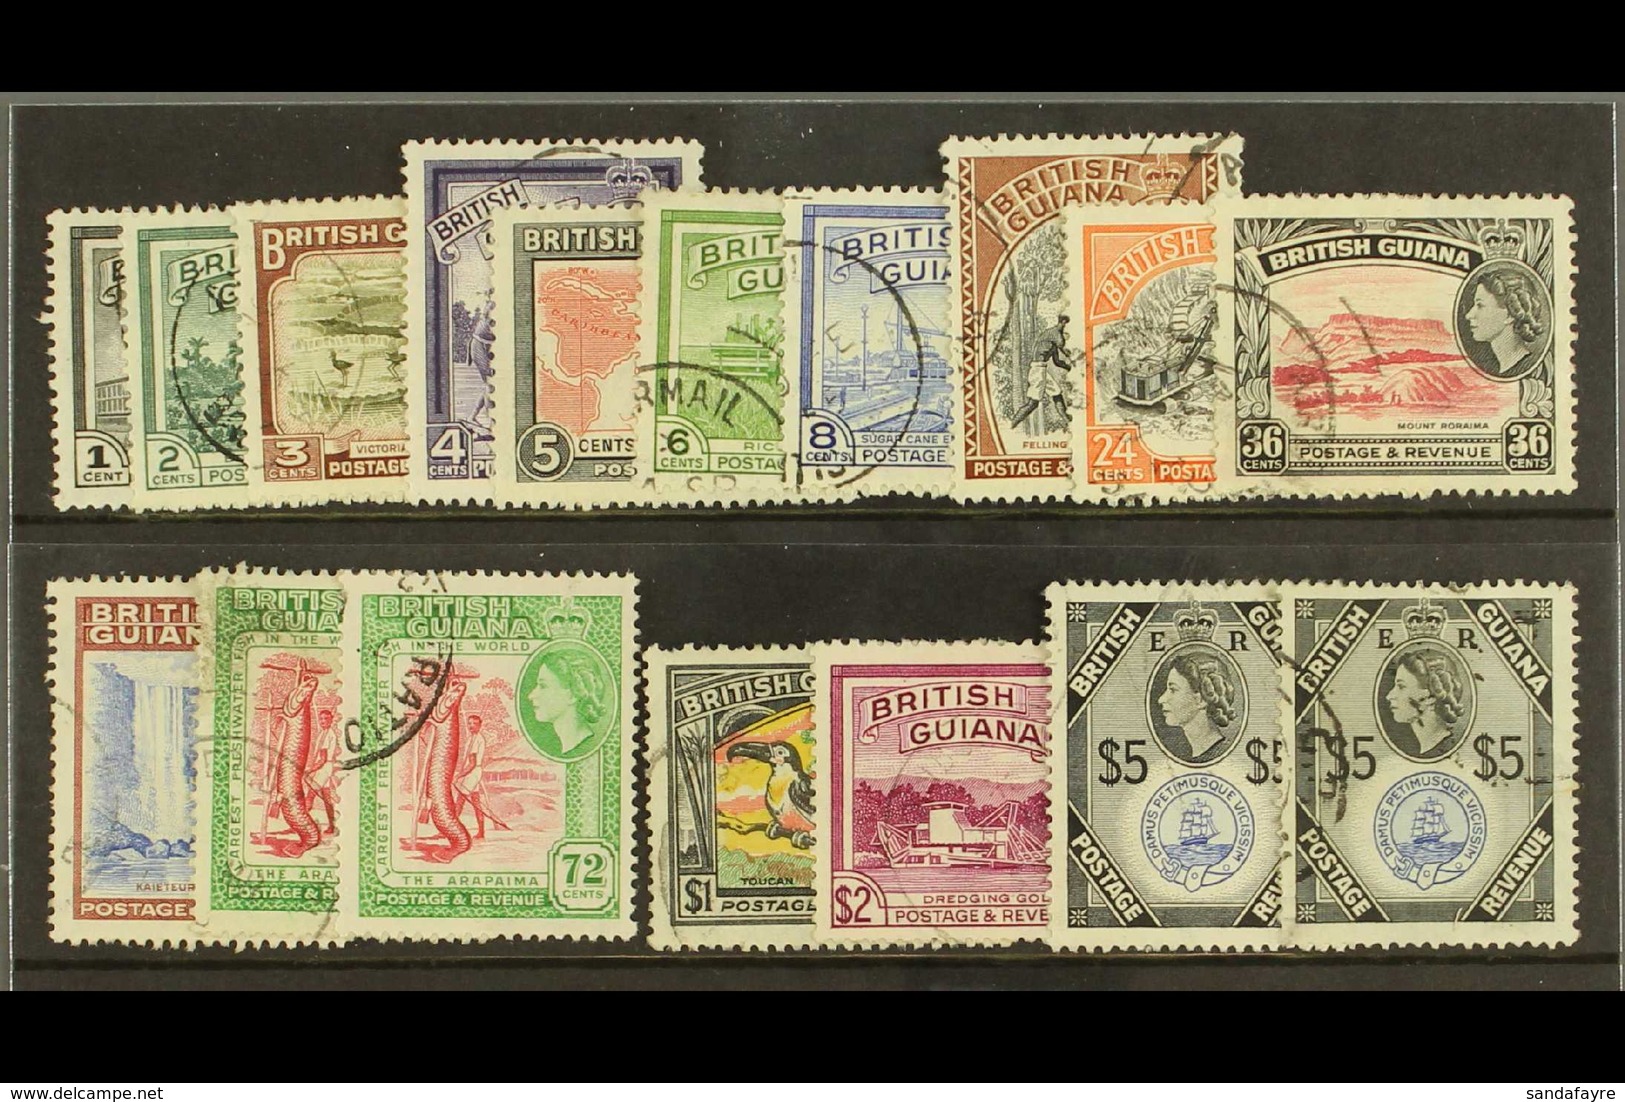 1954-63 Complete QEII Definitives Set, SG 331/345, Plus 72c And $5 DLR Printings, Fine Used. (17 Stamps) For More Images - Britisch-Guayana (...-1966)